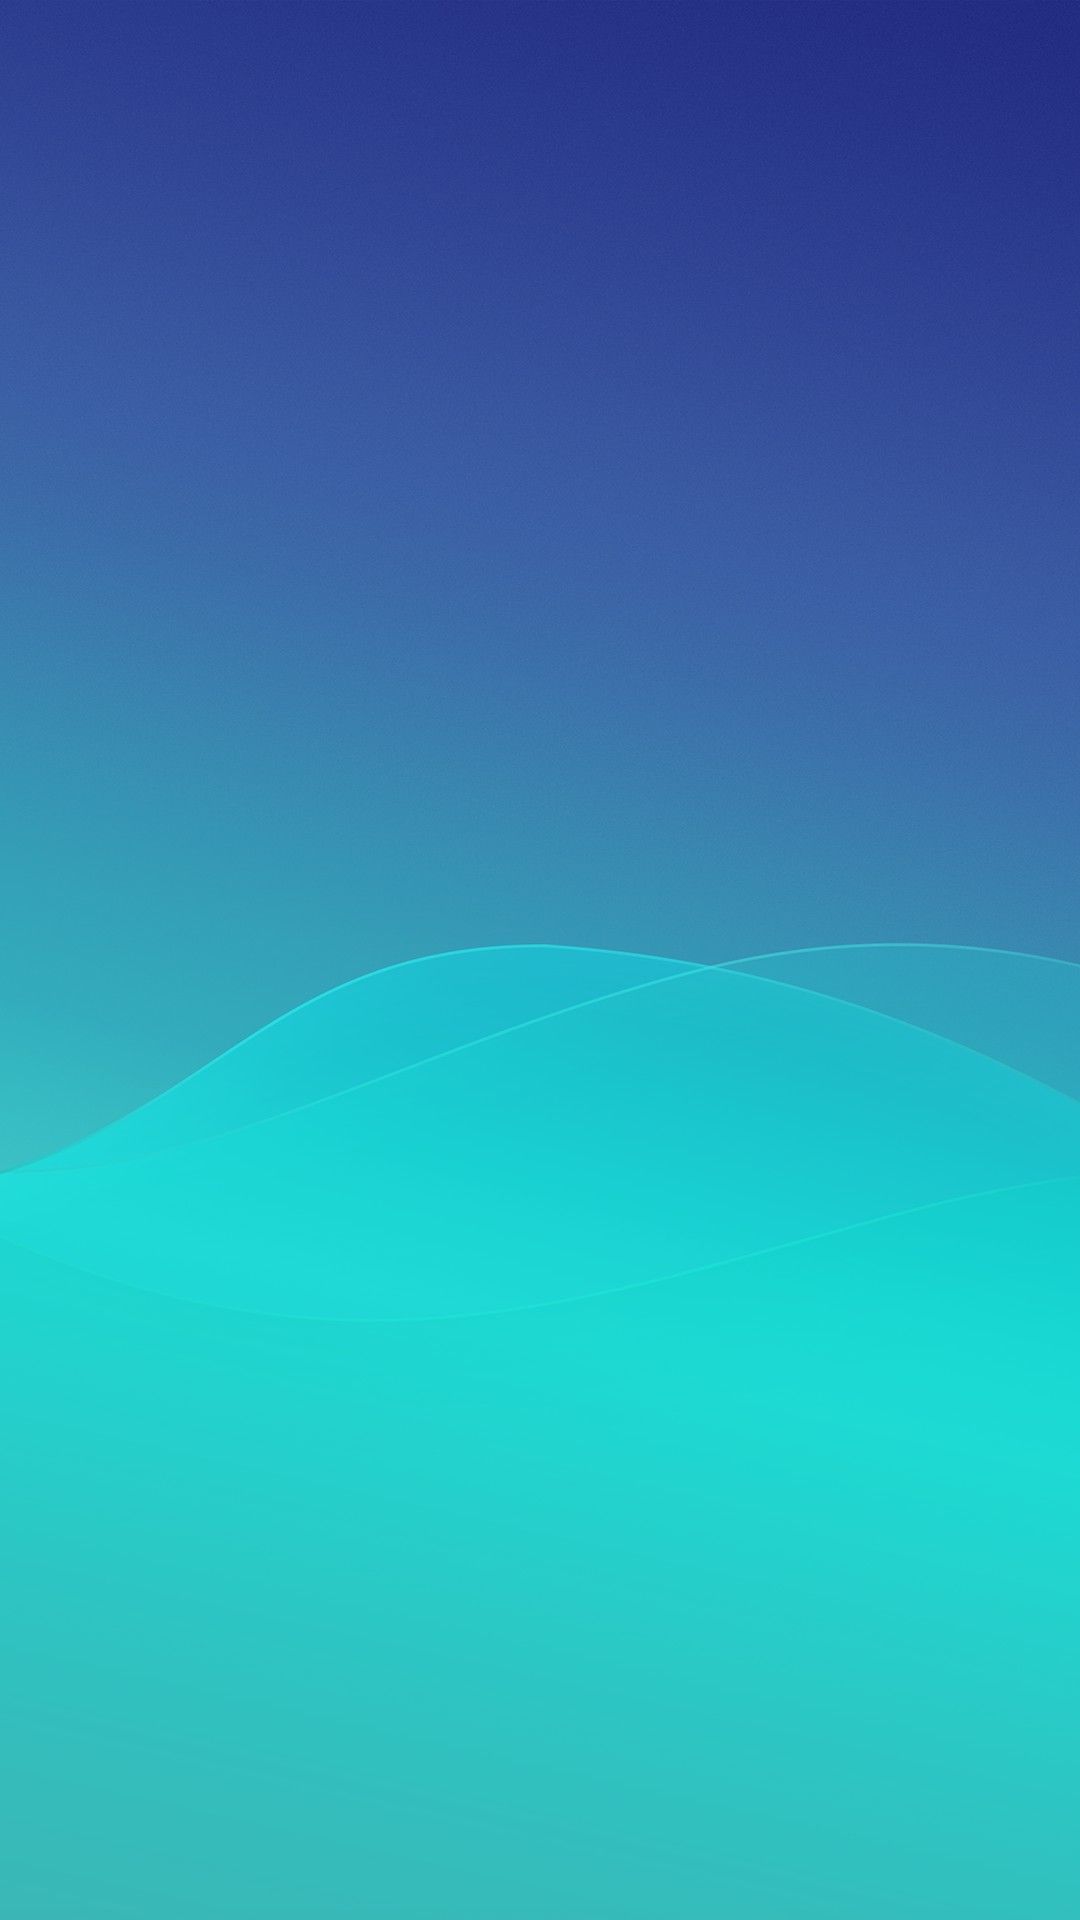 Minimal Abstract Blue Waves iPhone Wallpaper. Best iphone wallpaper, Android wallpaper, iPhone background image